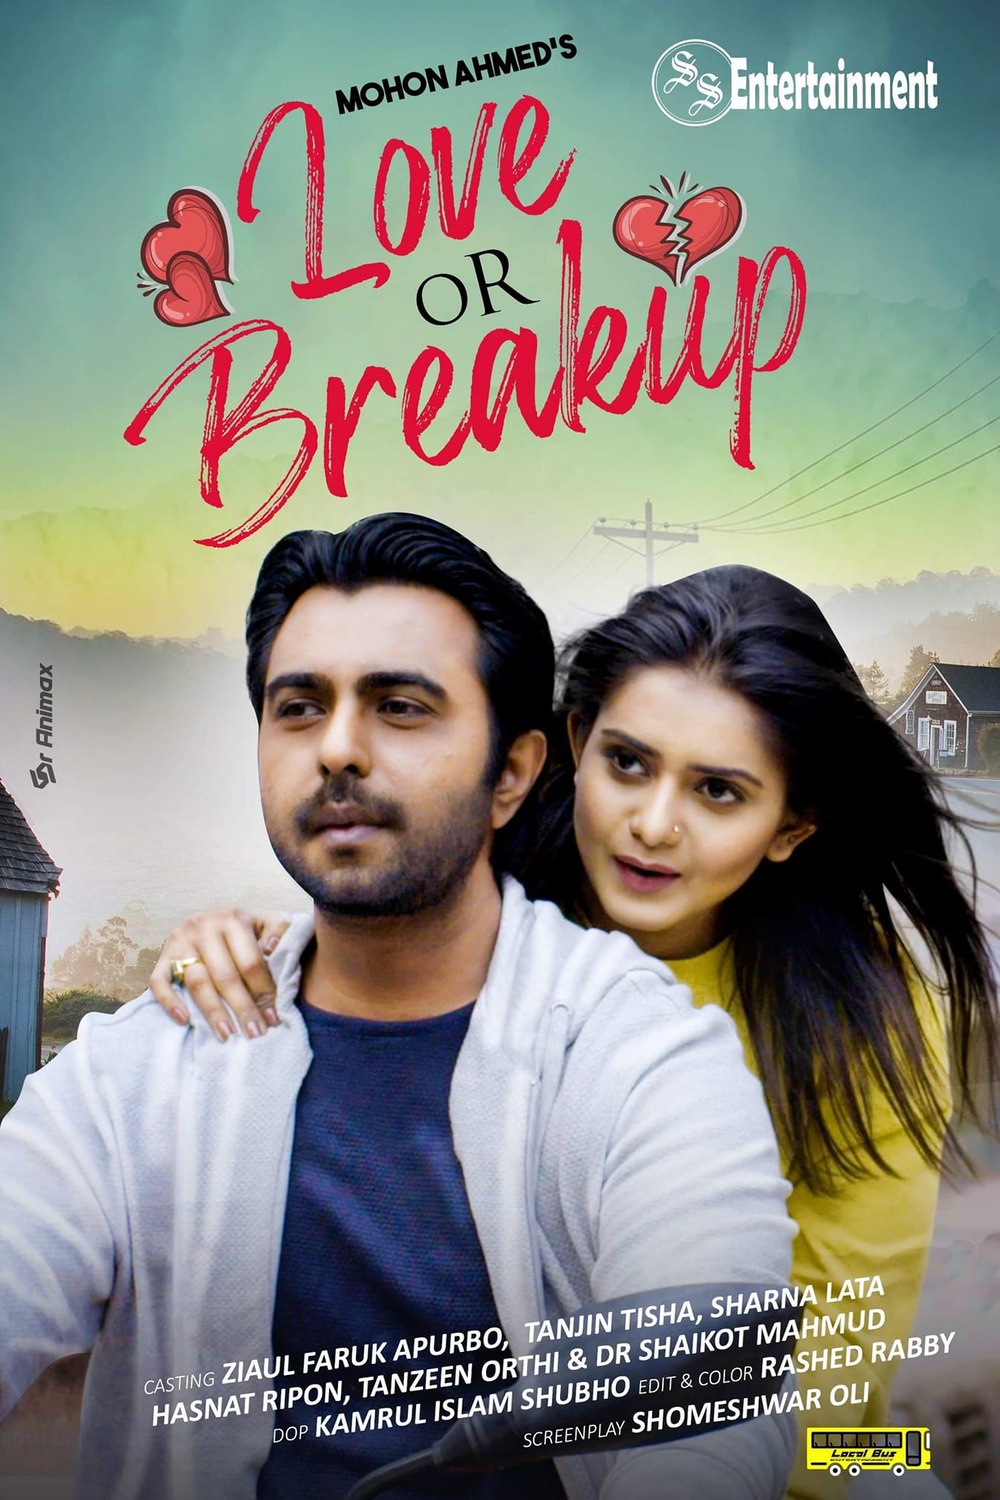 Extra Large TV Poster Image for Love or breakup 